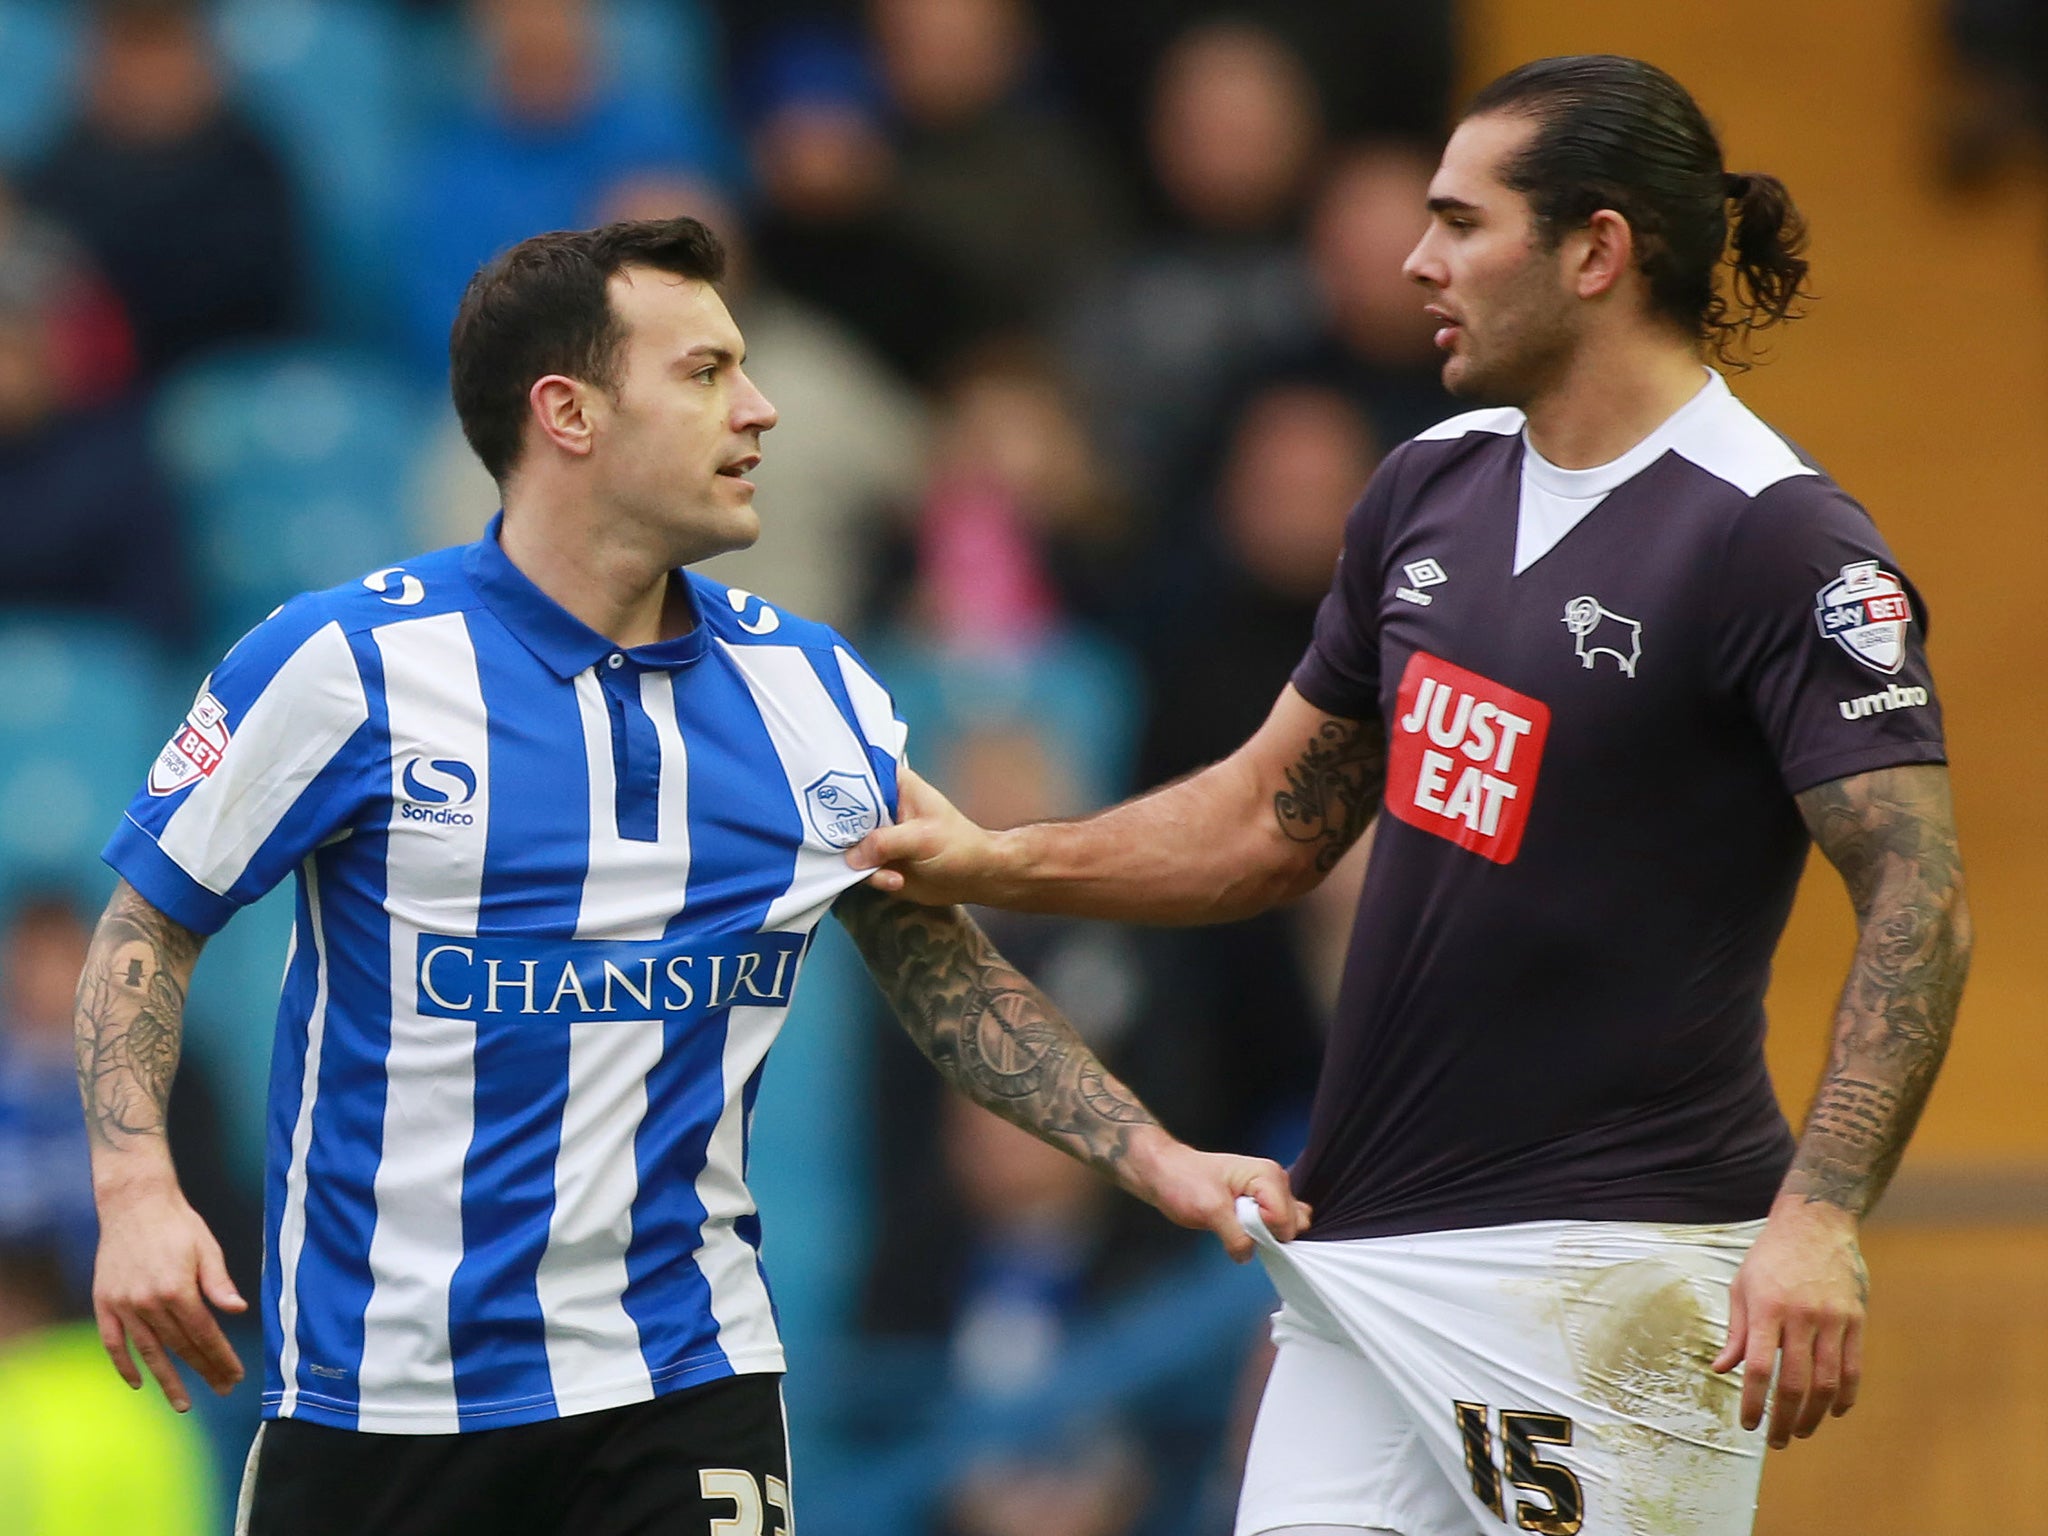 Sheffield Wednesday’s Ross Wallace, left, argues with the Derby County midfielder Bradley Johnson